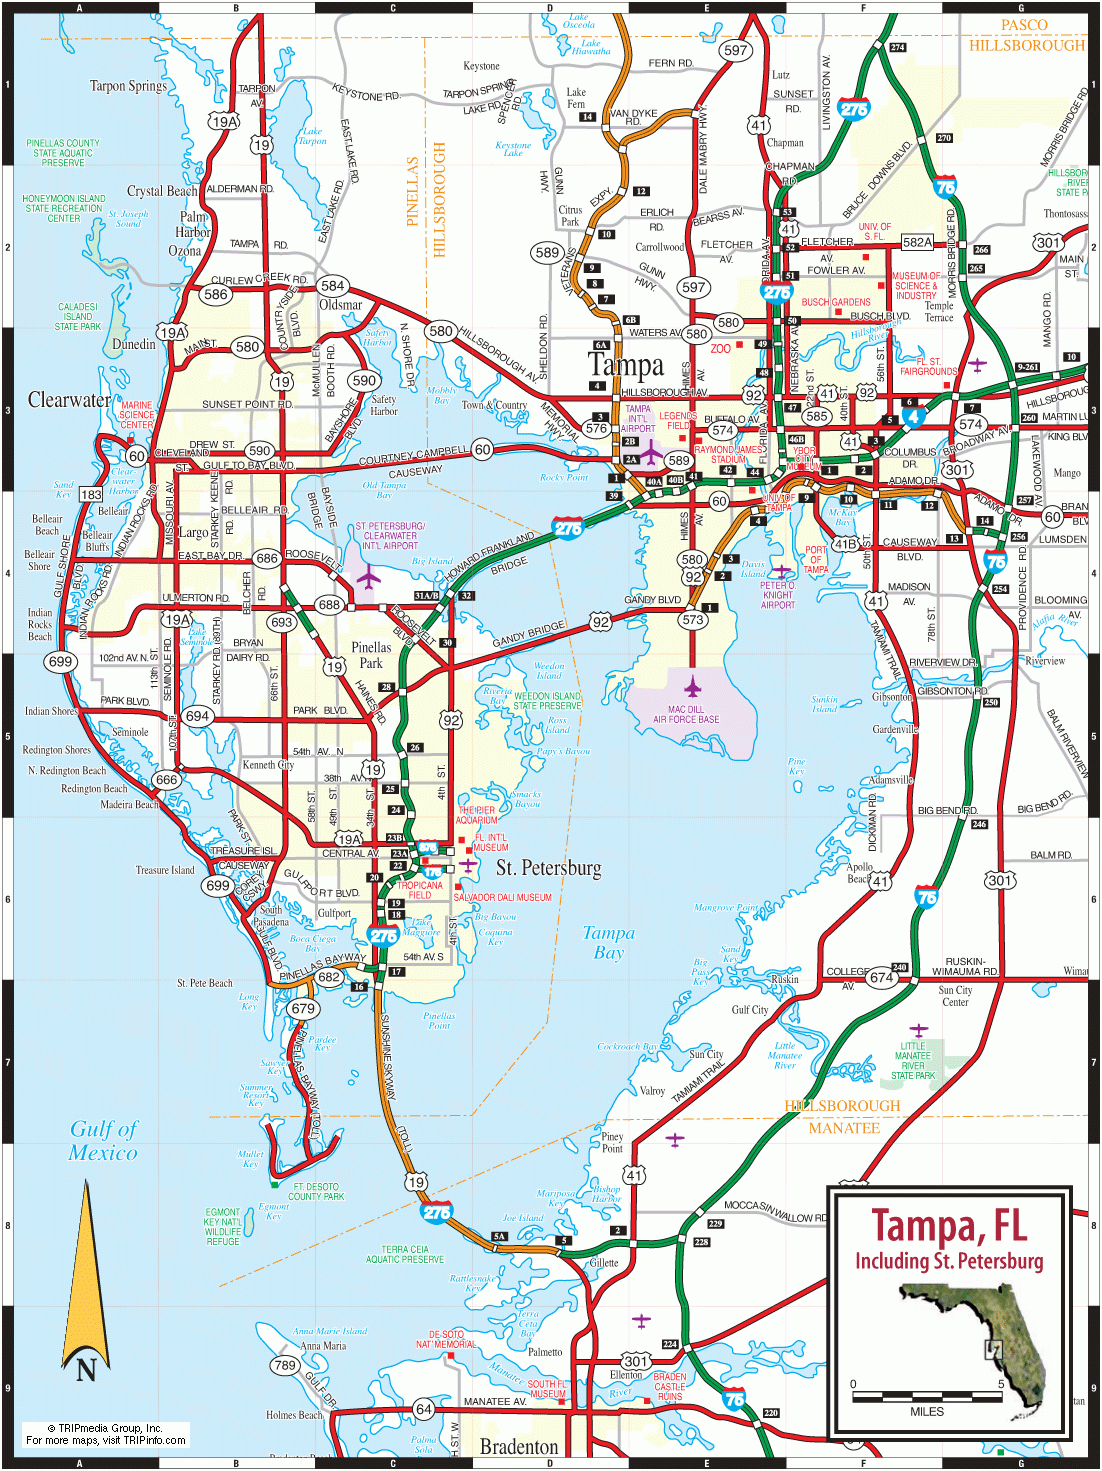 St Petersburg Florida City Map - St Petersburg Florida • Mappery - Tampa Florida Map With Cities